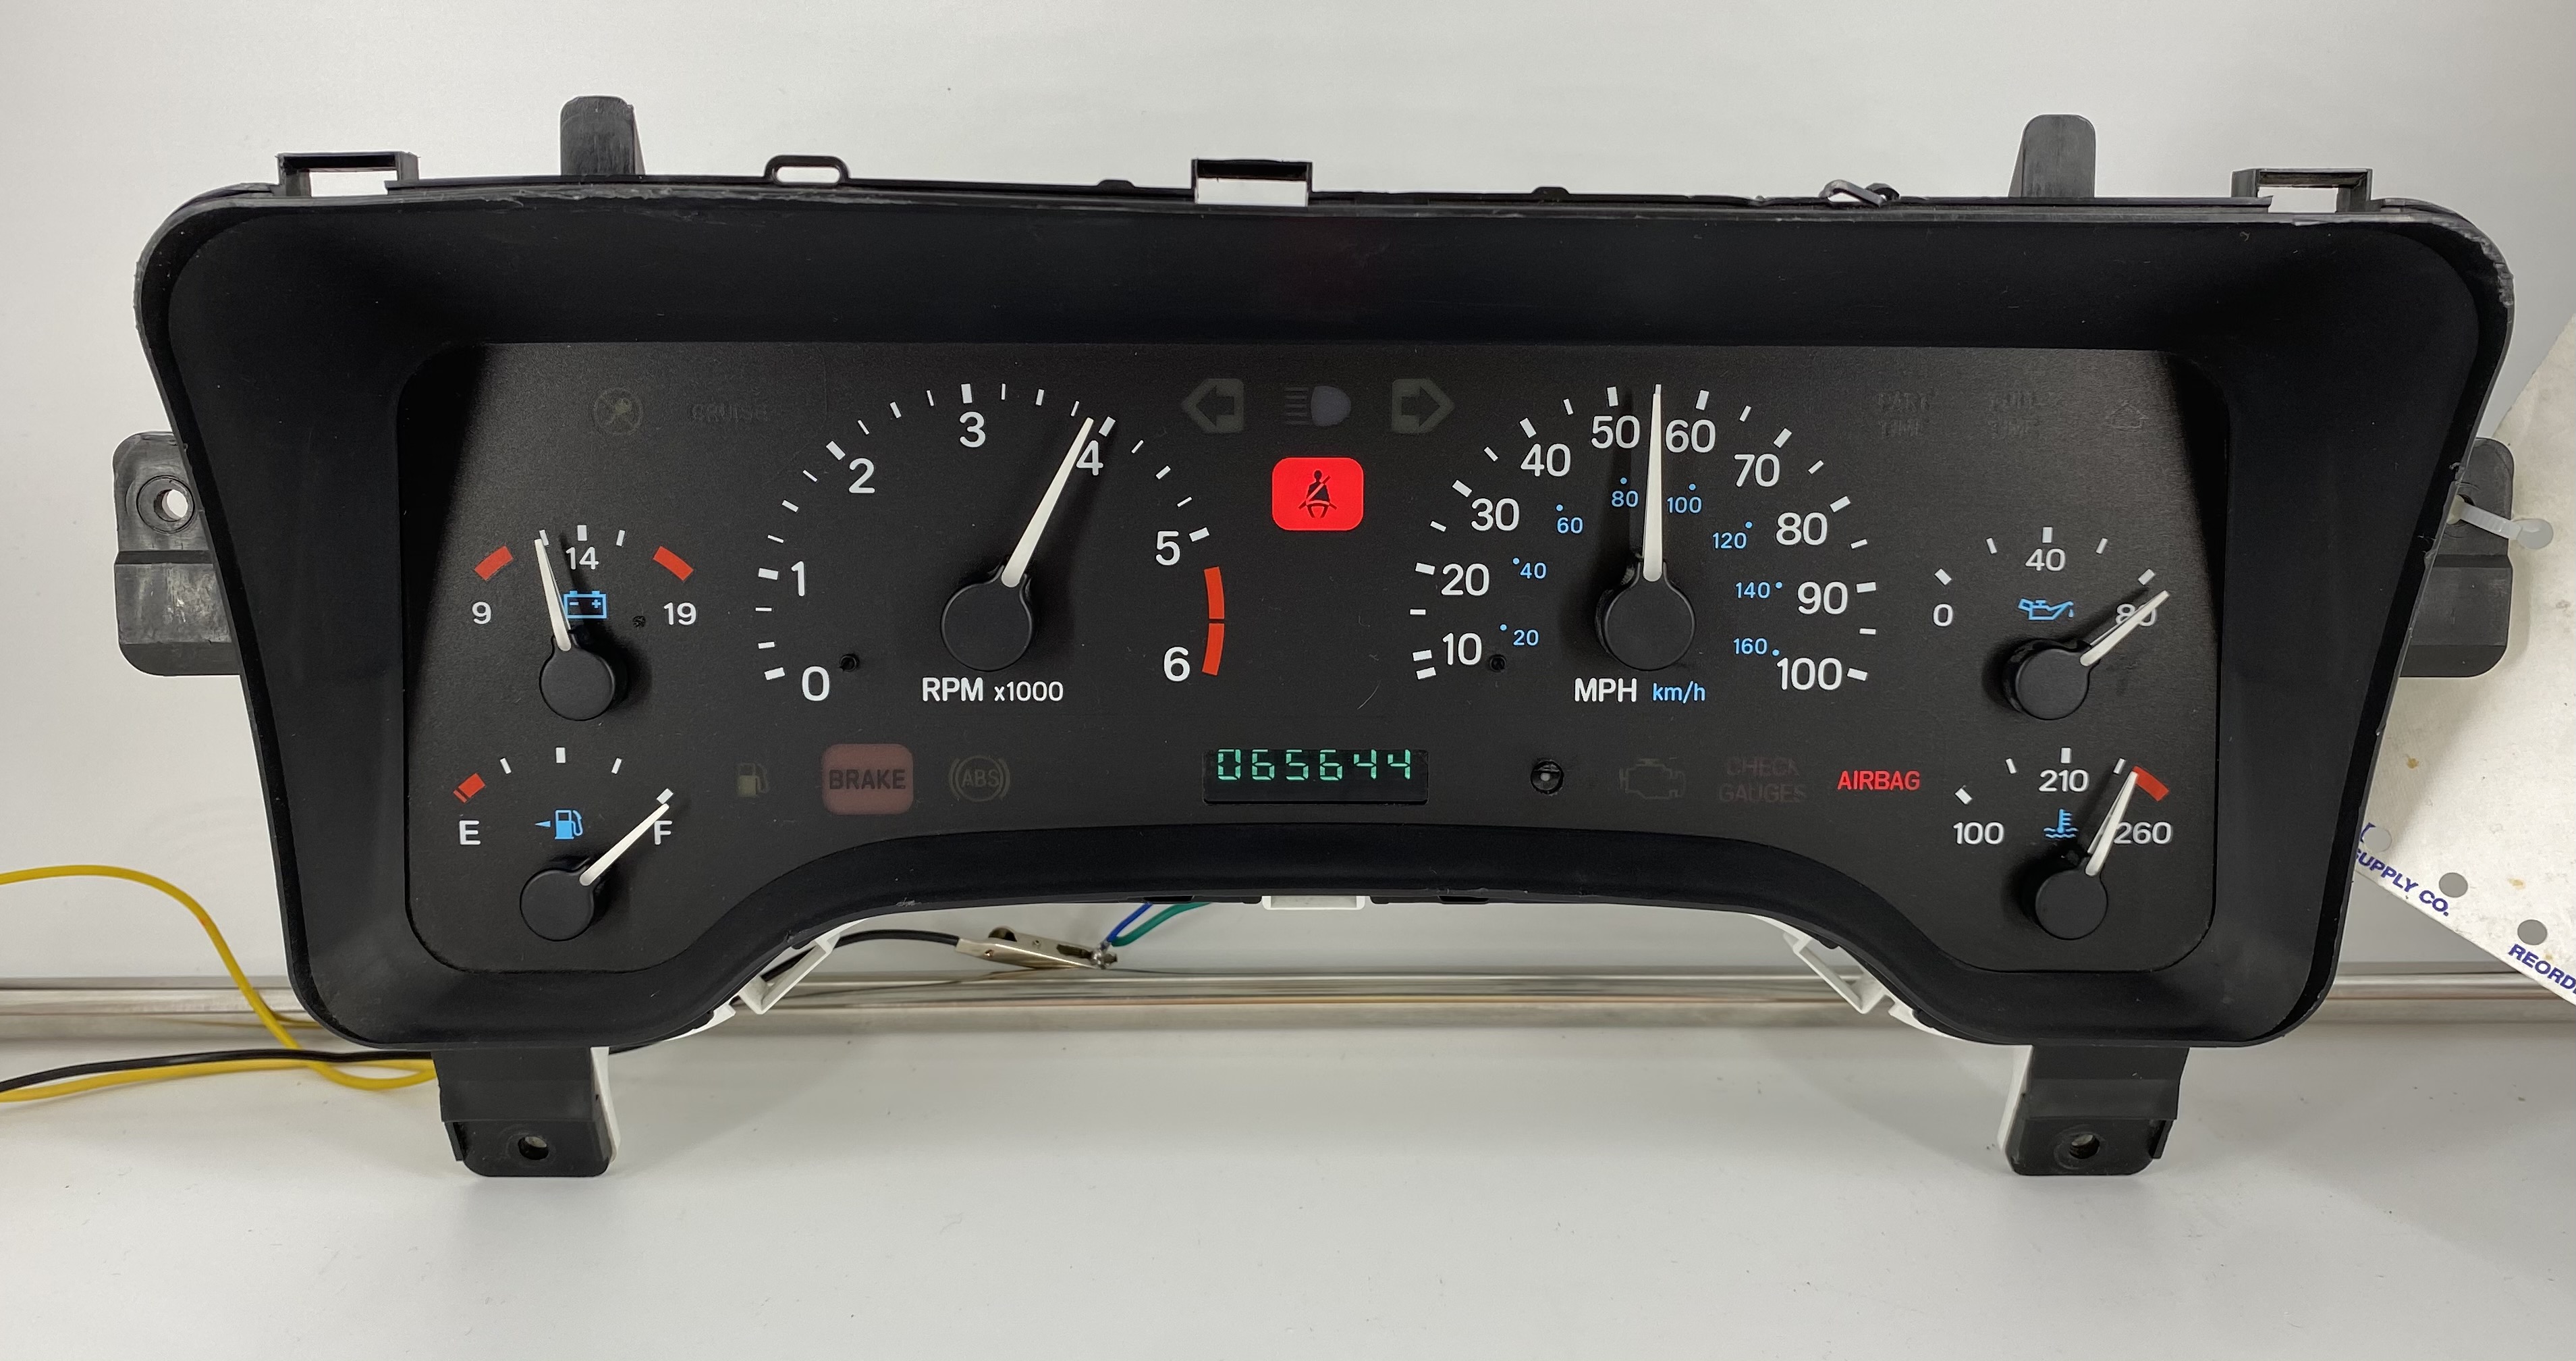 2000 JEEP WRANGLER USED DASHBOARD INSTRUMENT CLUSTER FOR SALE (MPH) - DASHBOARD  INSTRUMENT CLUSTER